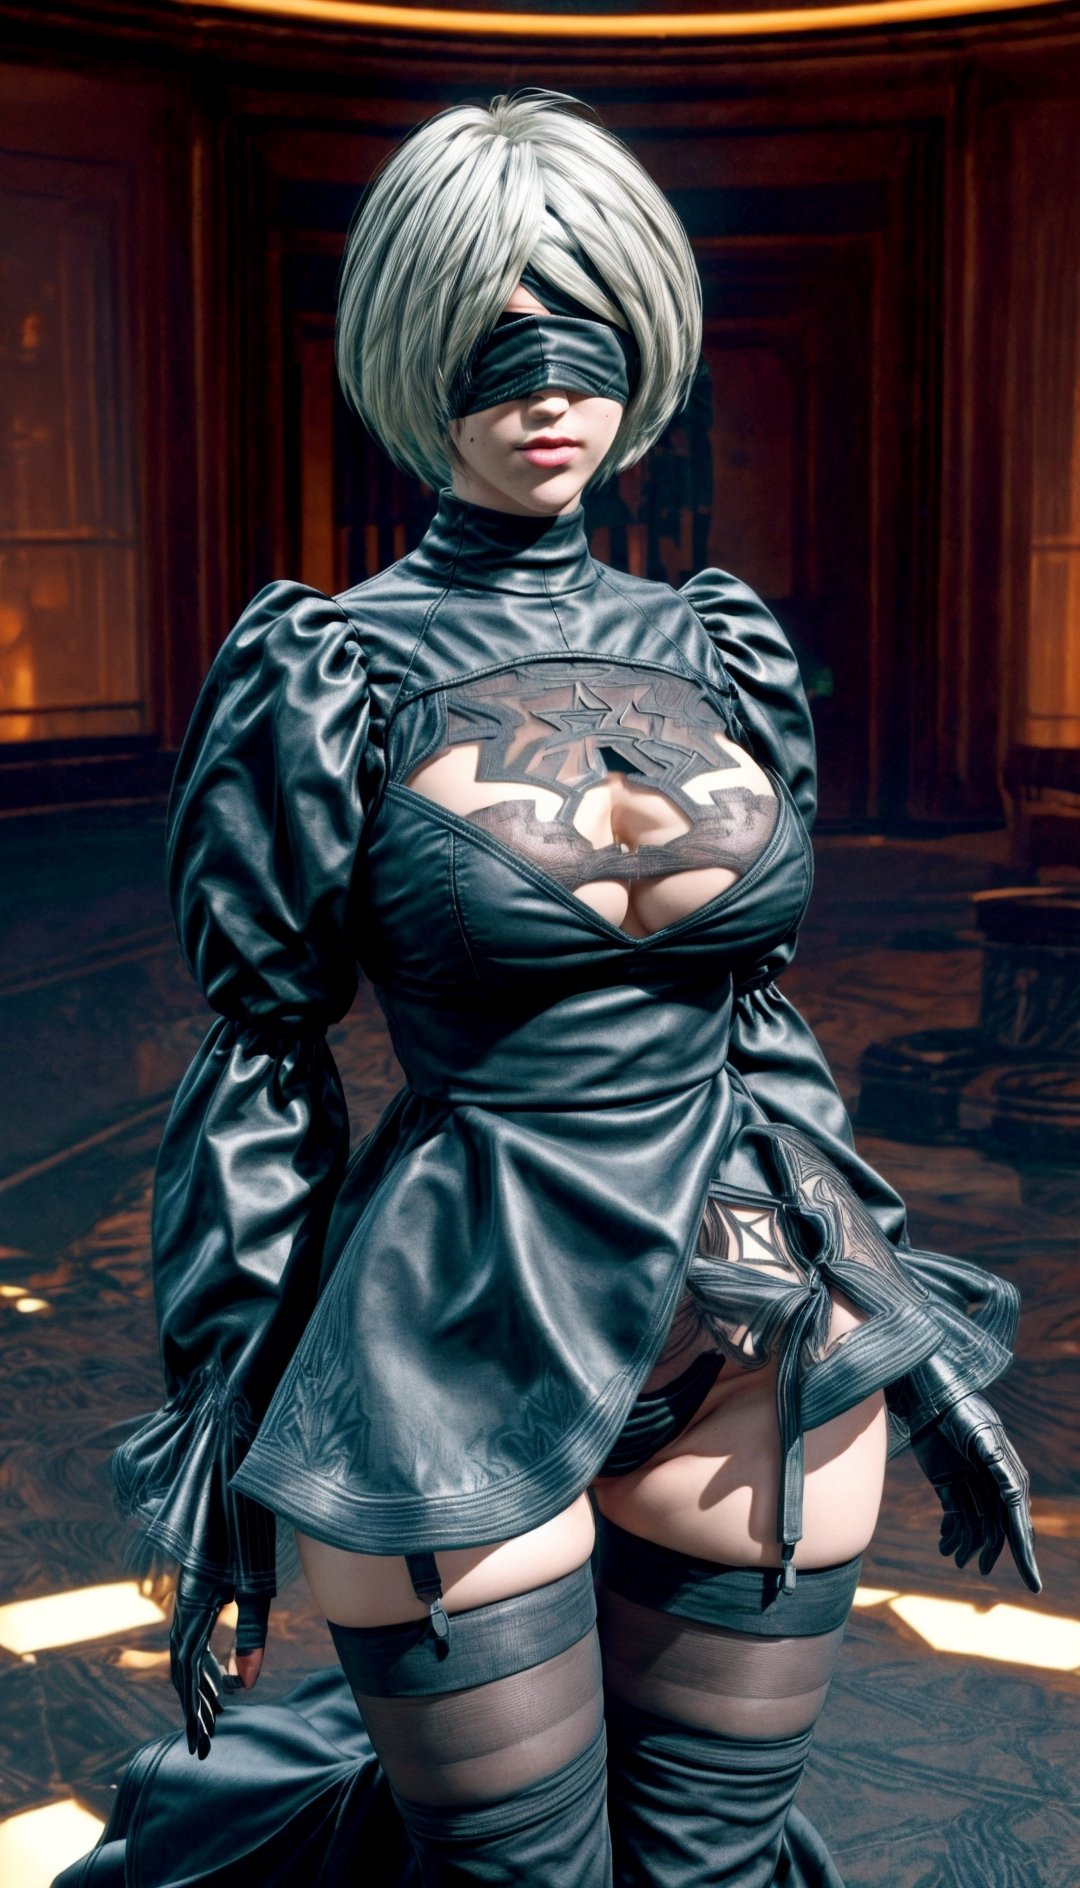 Cgi, realistic, best quality, 8k graphics, uhd graphics, realistic, bright colours, best graphics, complex background,Original 2B Nier Automata,Very big breasts,seductive,long legs,insane detail,boobs popping out,cameltoe,sexy shaved pussy,very sexy girl,see through clothes,perfect and realistic boobs and pussy,sexy ass,stripping clothes,head to toe full body,More Detail,show legs,huge thigh gap,big boobs popping out,showing sexy ass bending over,neon white hair,n_2b,show sexy ass bend over,blindfold, black blindfold,white clothes